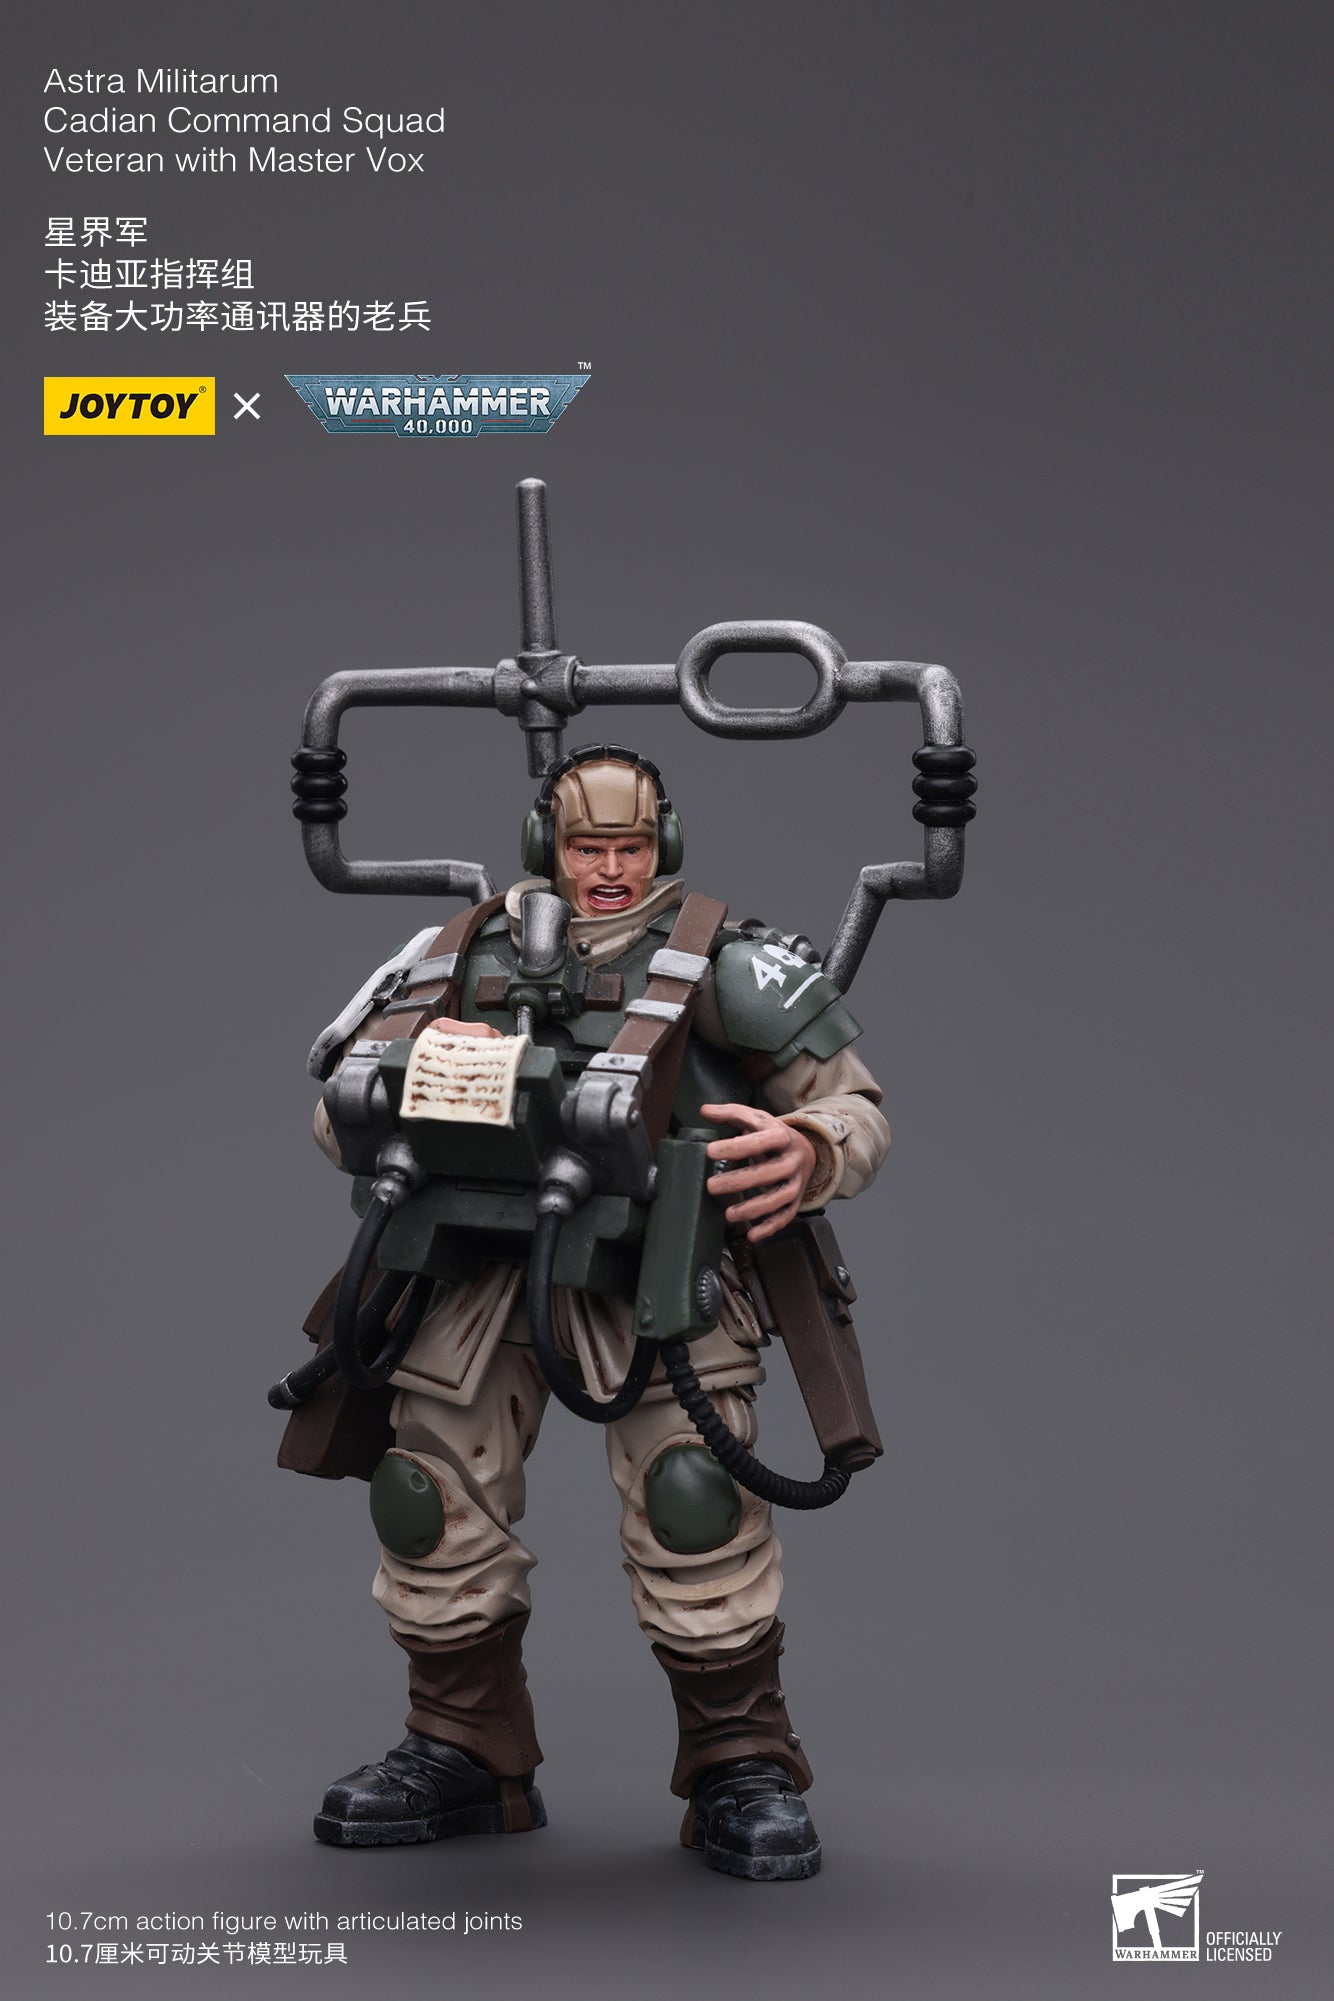 Astra Militarum Cadian Command Squad Veteran with Master Vox - Warhammer 40K Action Figure By JOYTOY